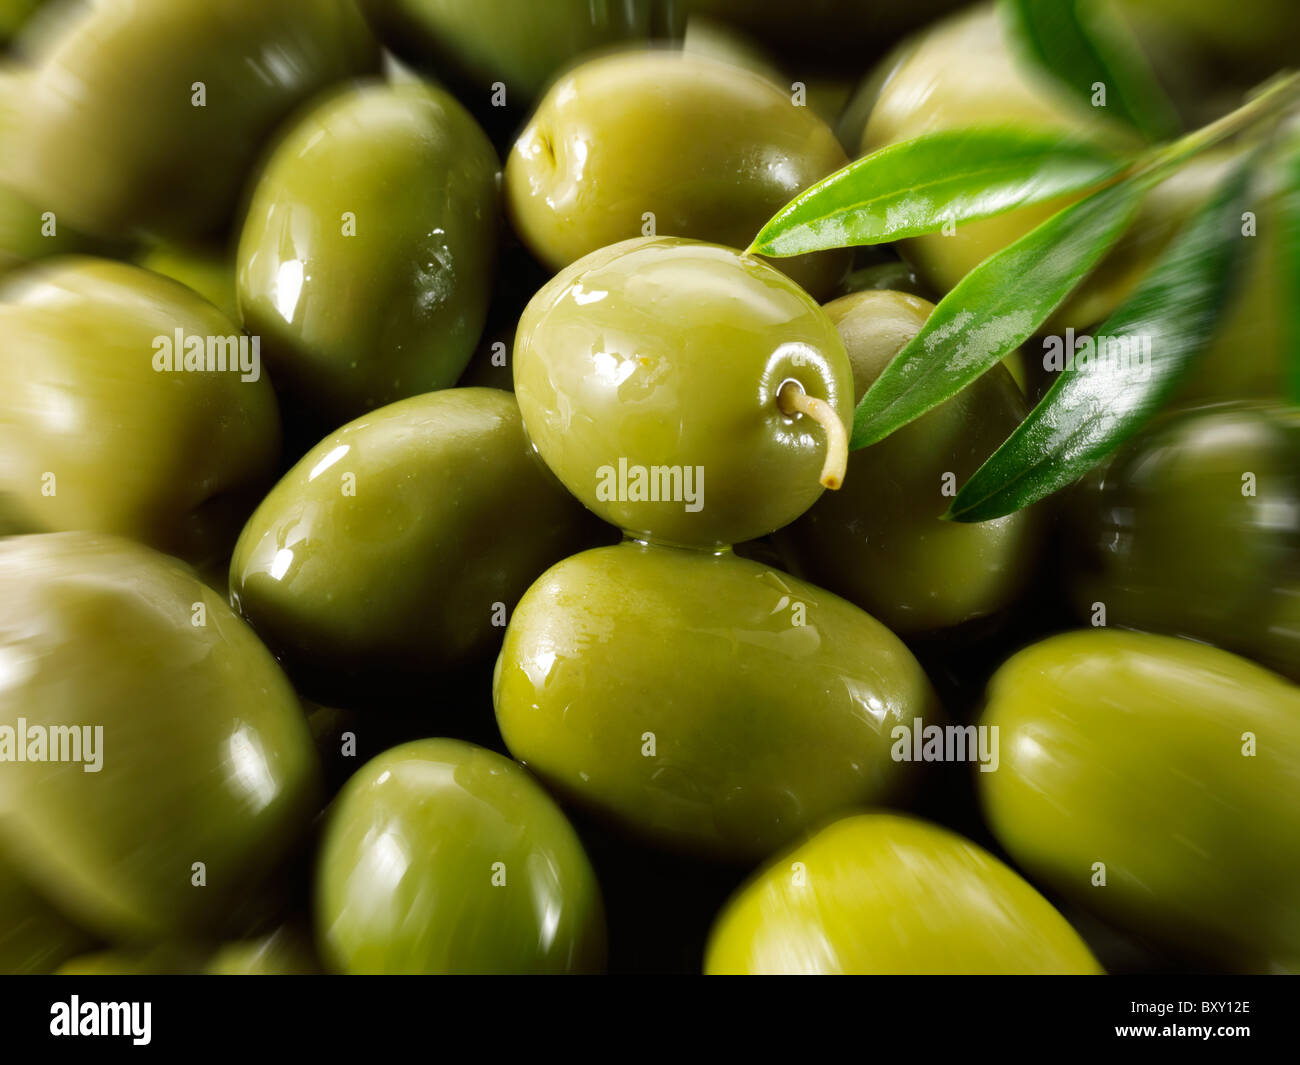 Fresh green queen olives photos, pictures & images. Stock Photo